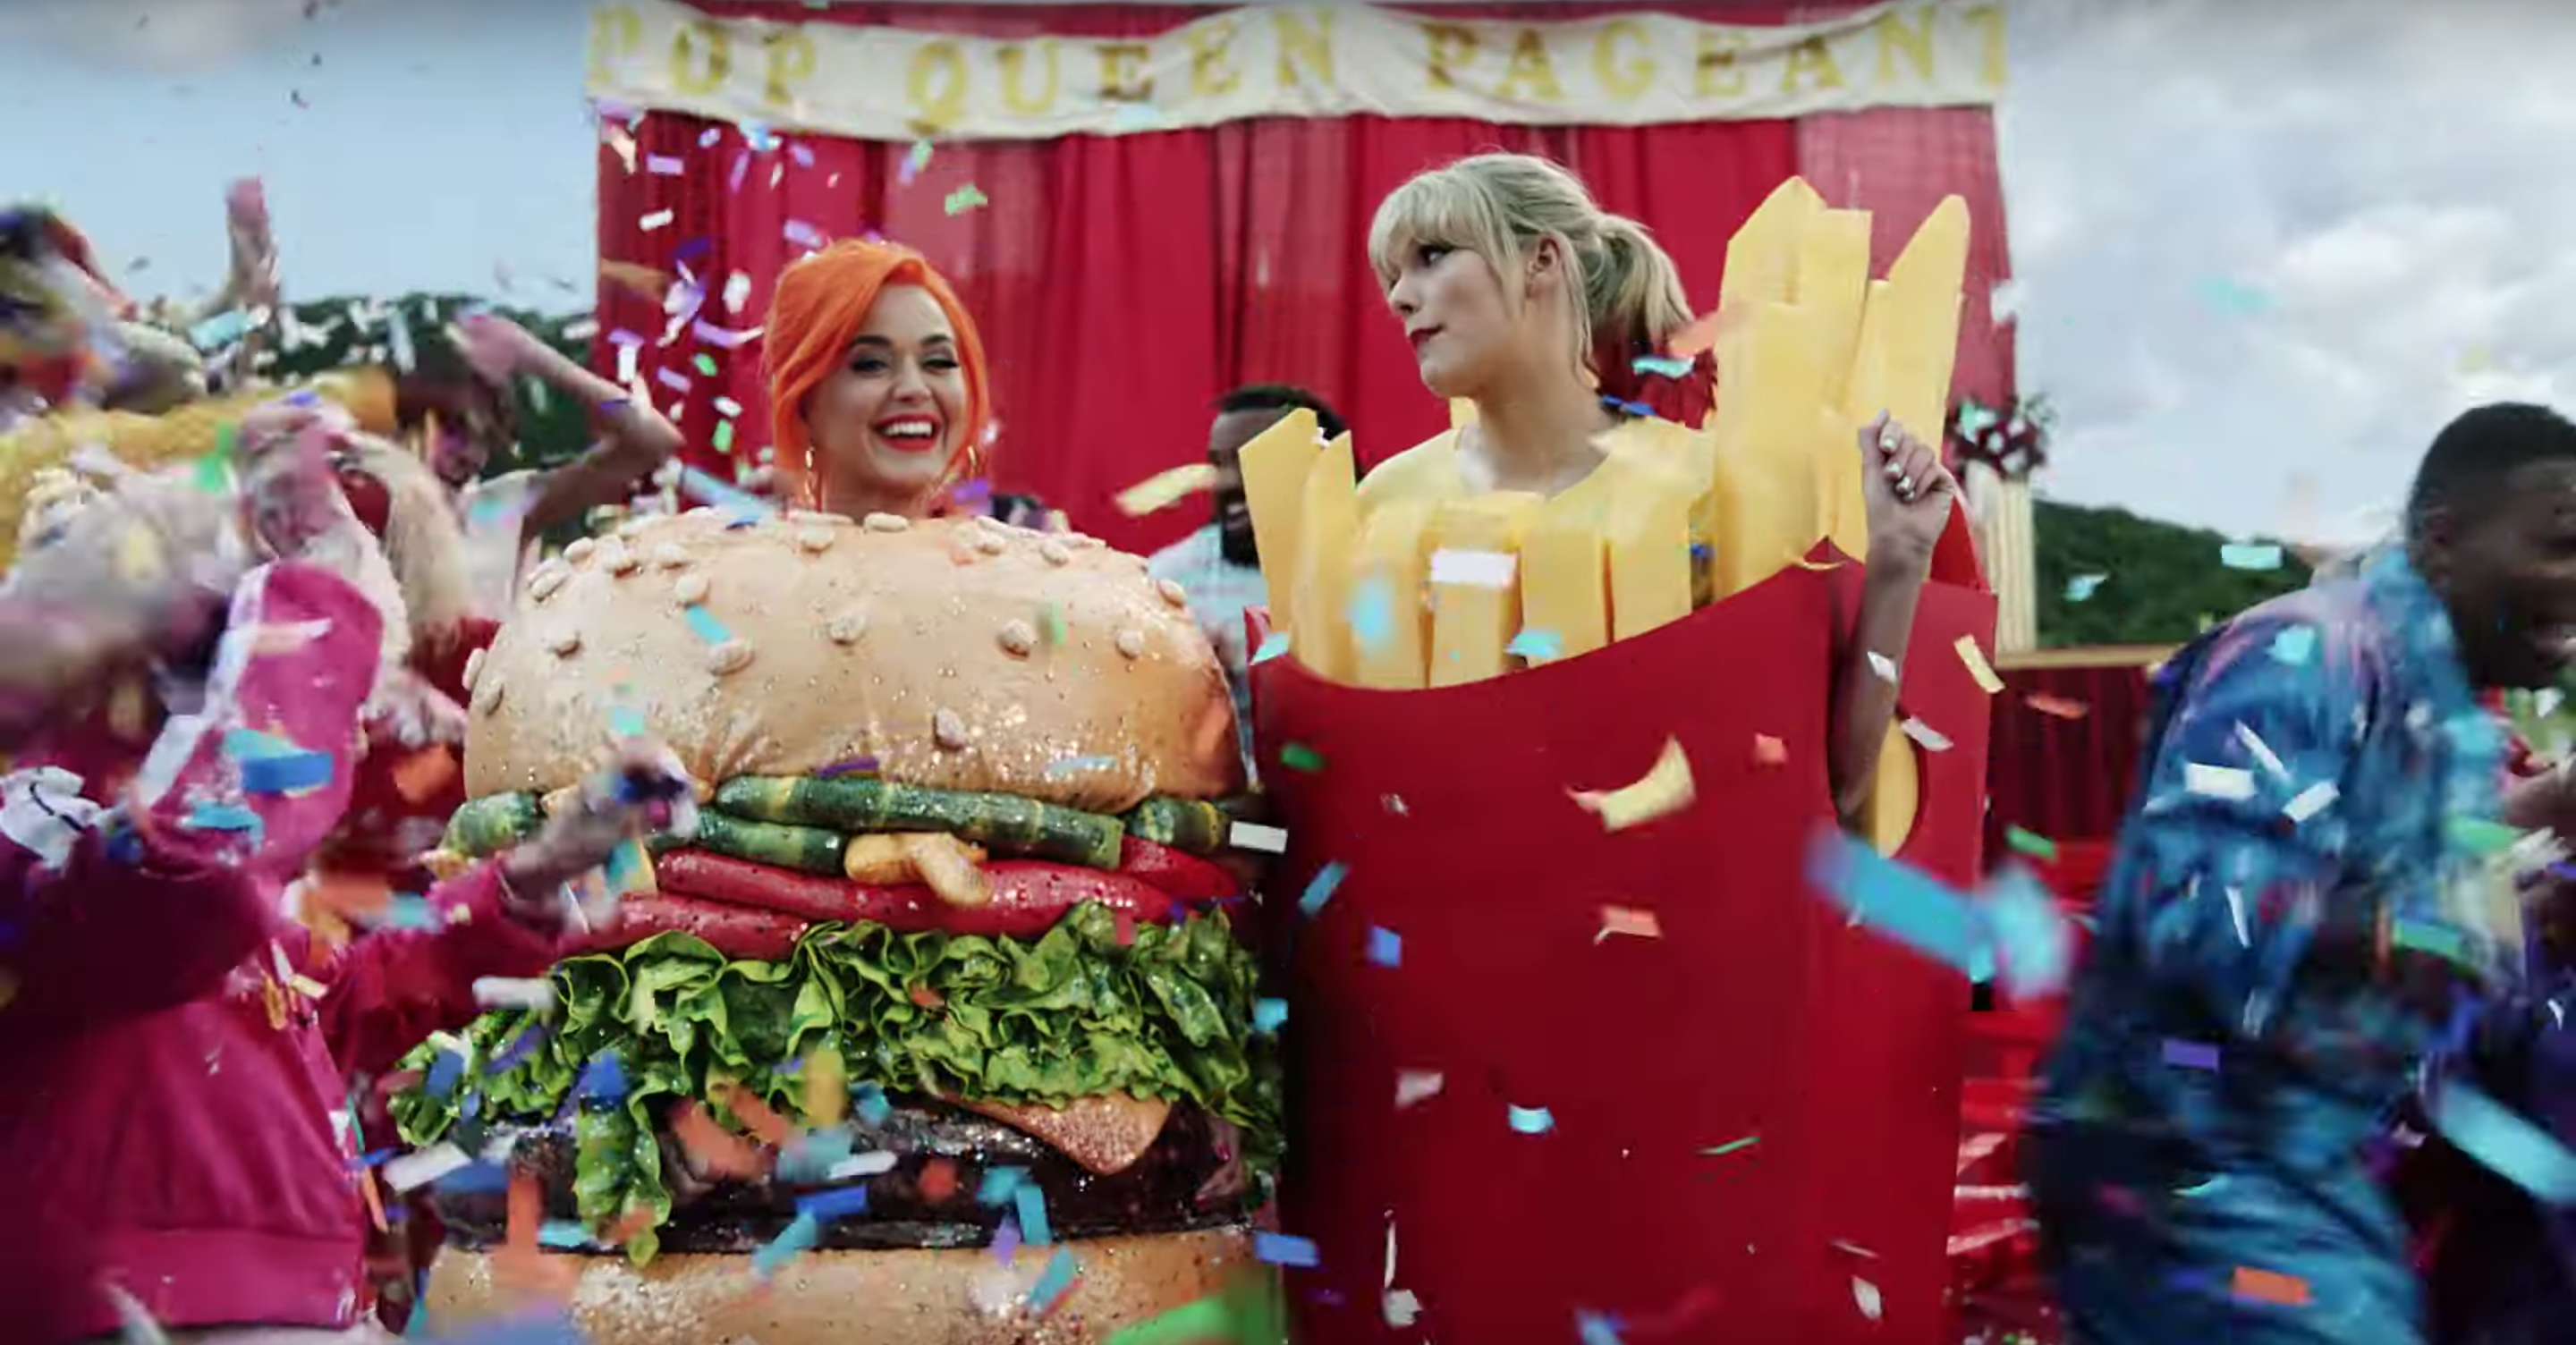 Taylor Swifts You Need To Calm Down Music Video Has Katy